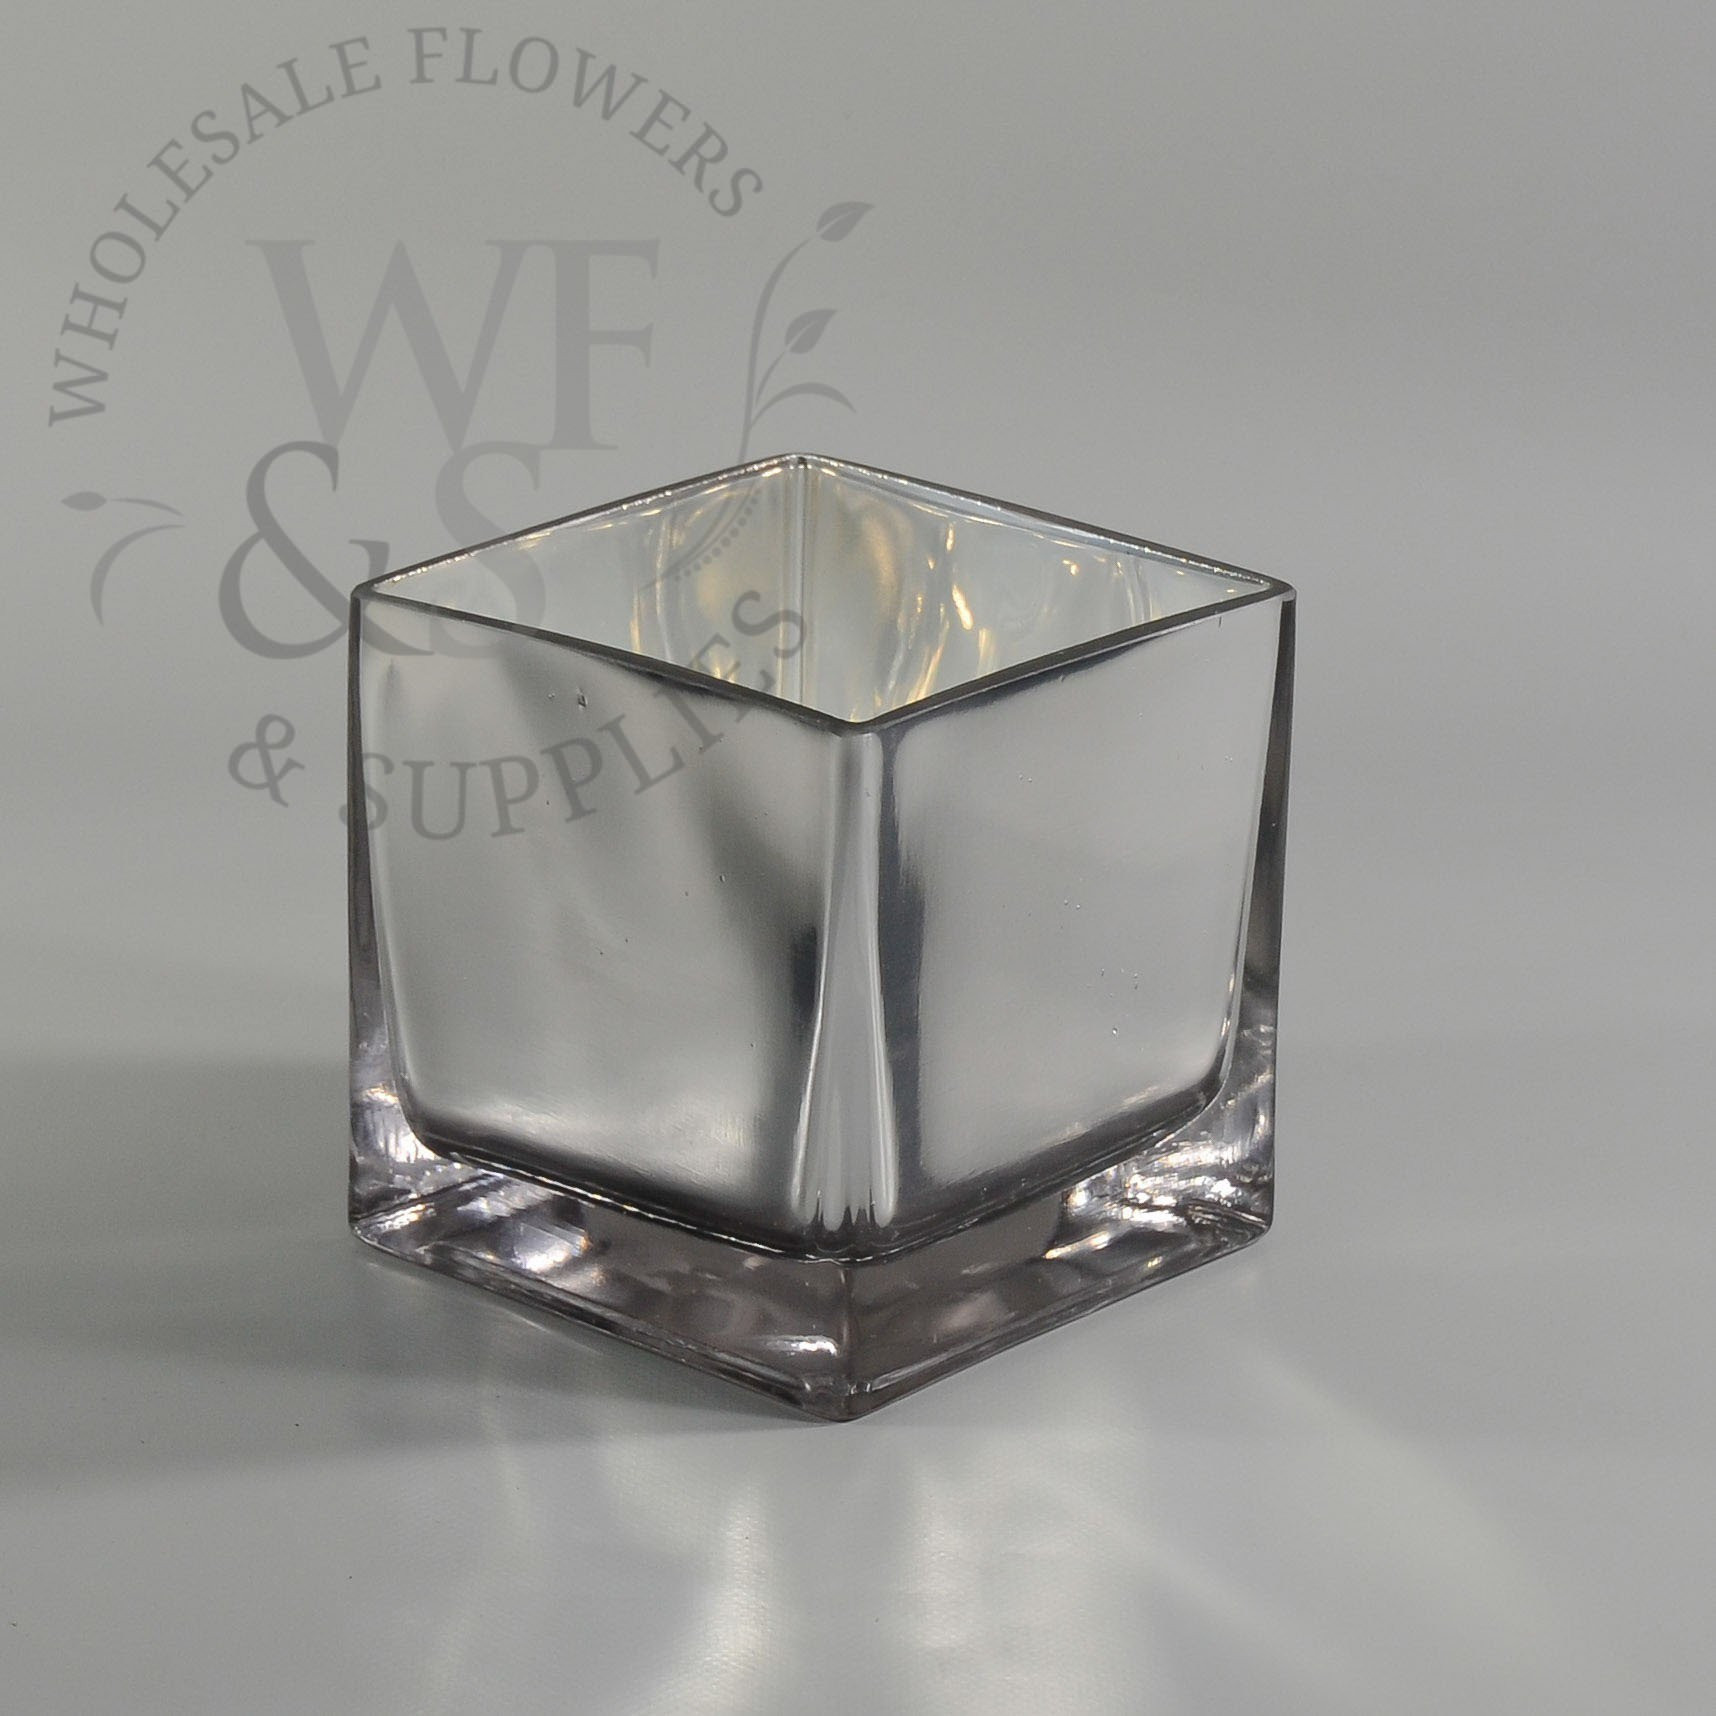 16 Wonderful Small Silver Vase 2024 free download small silver vase of 13 fresh silver mirror vase bogekompresorturkiye com pertaining to crystal mirror inspirational mirror vase 8 1h vases mirrored square cube riser inch squarei 0d uk